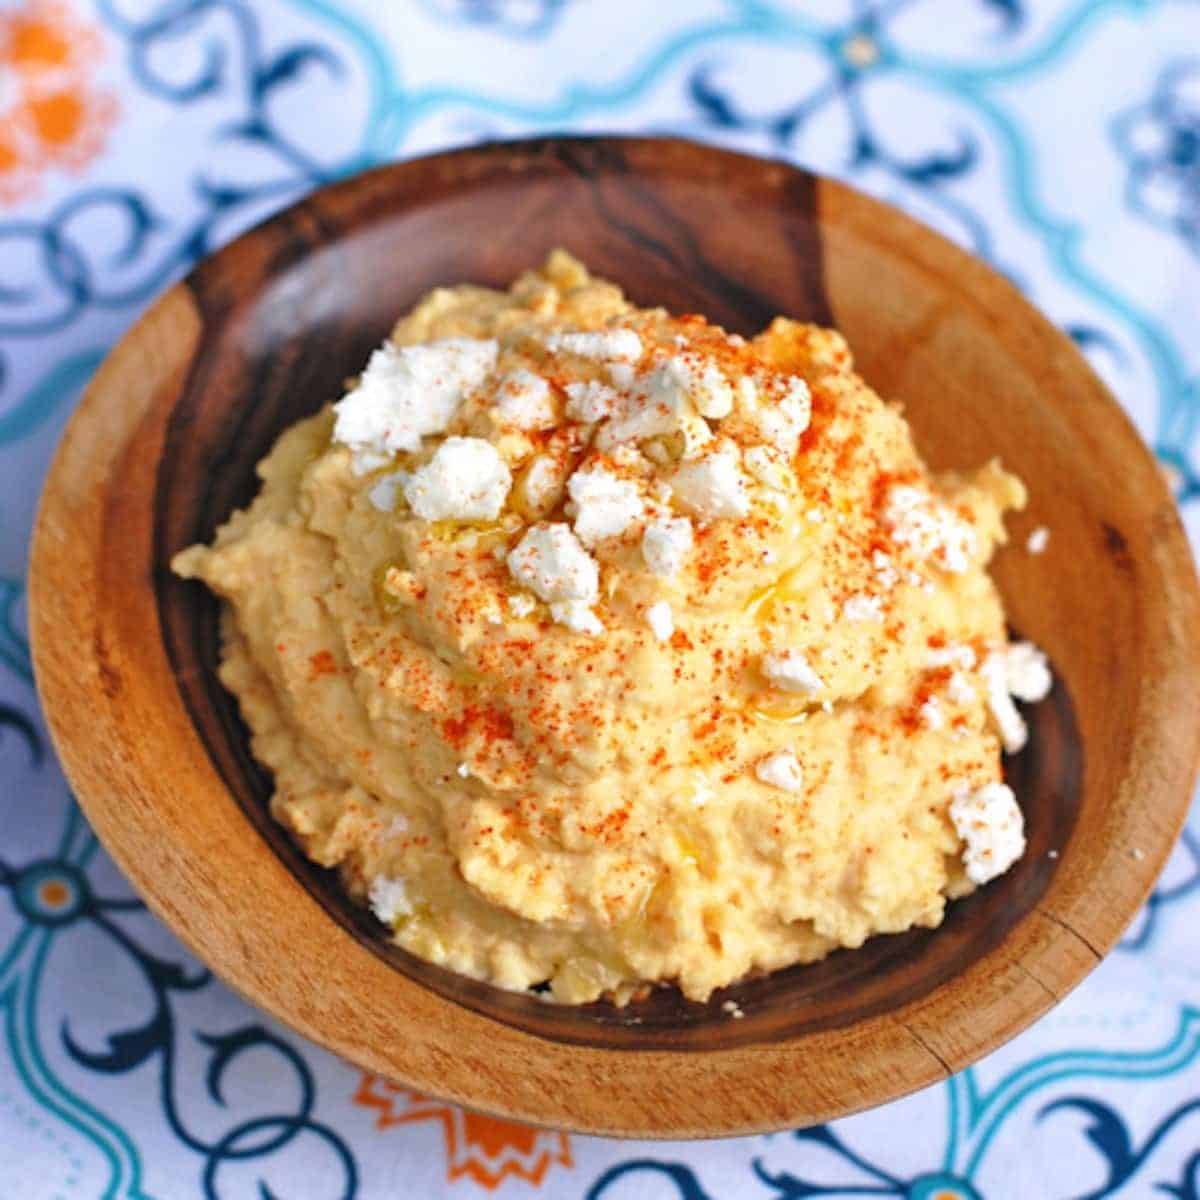 Spicy hummus topped with crushed red pepper, feta cheese, and olive oil in a wooden bowl.